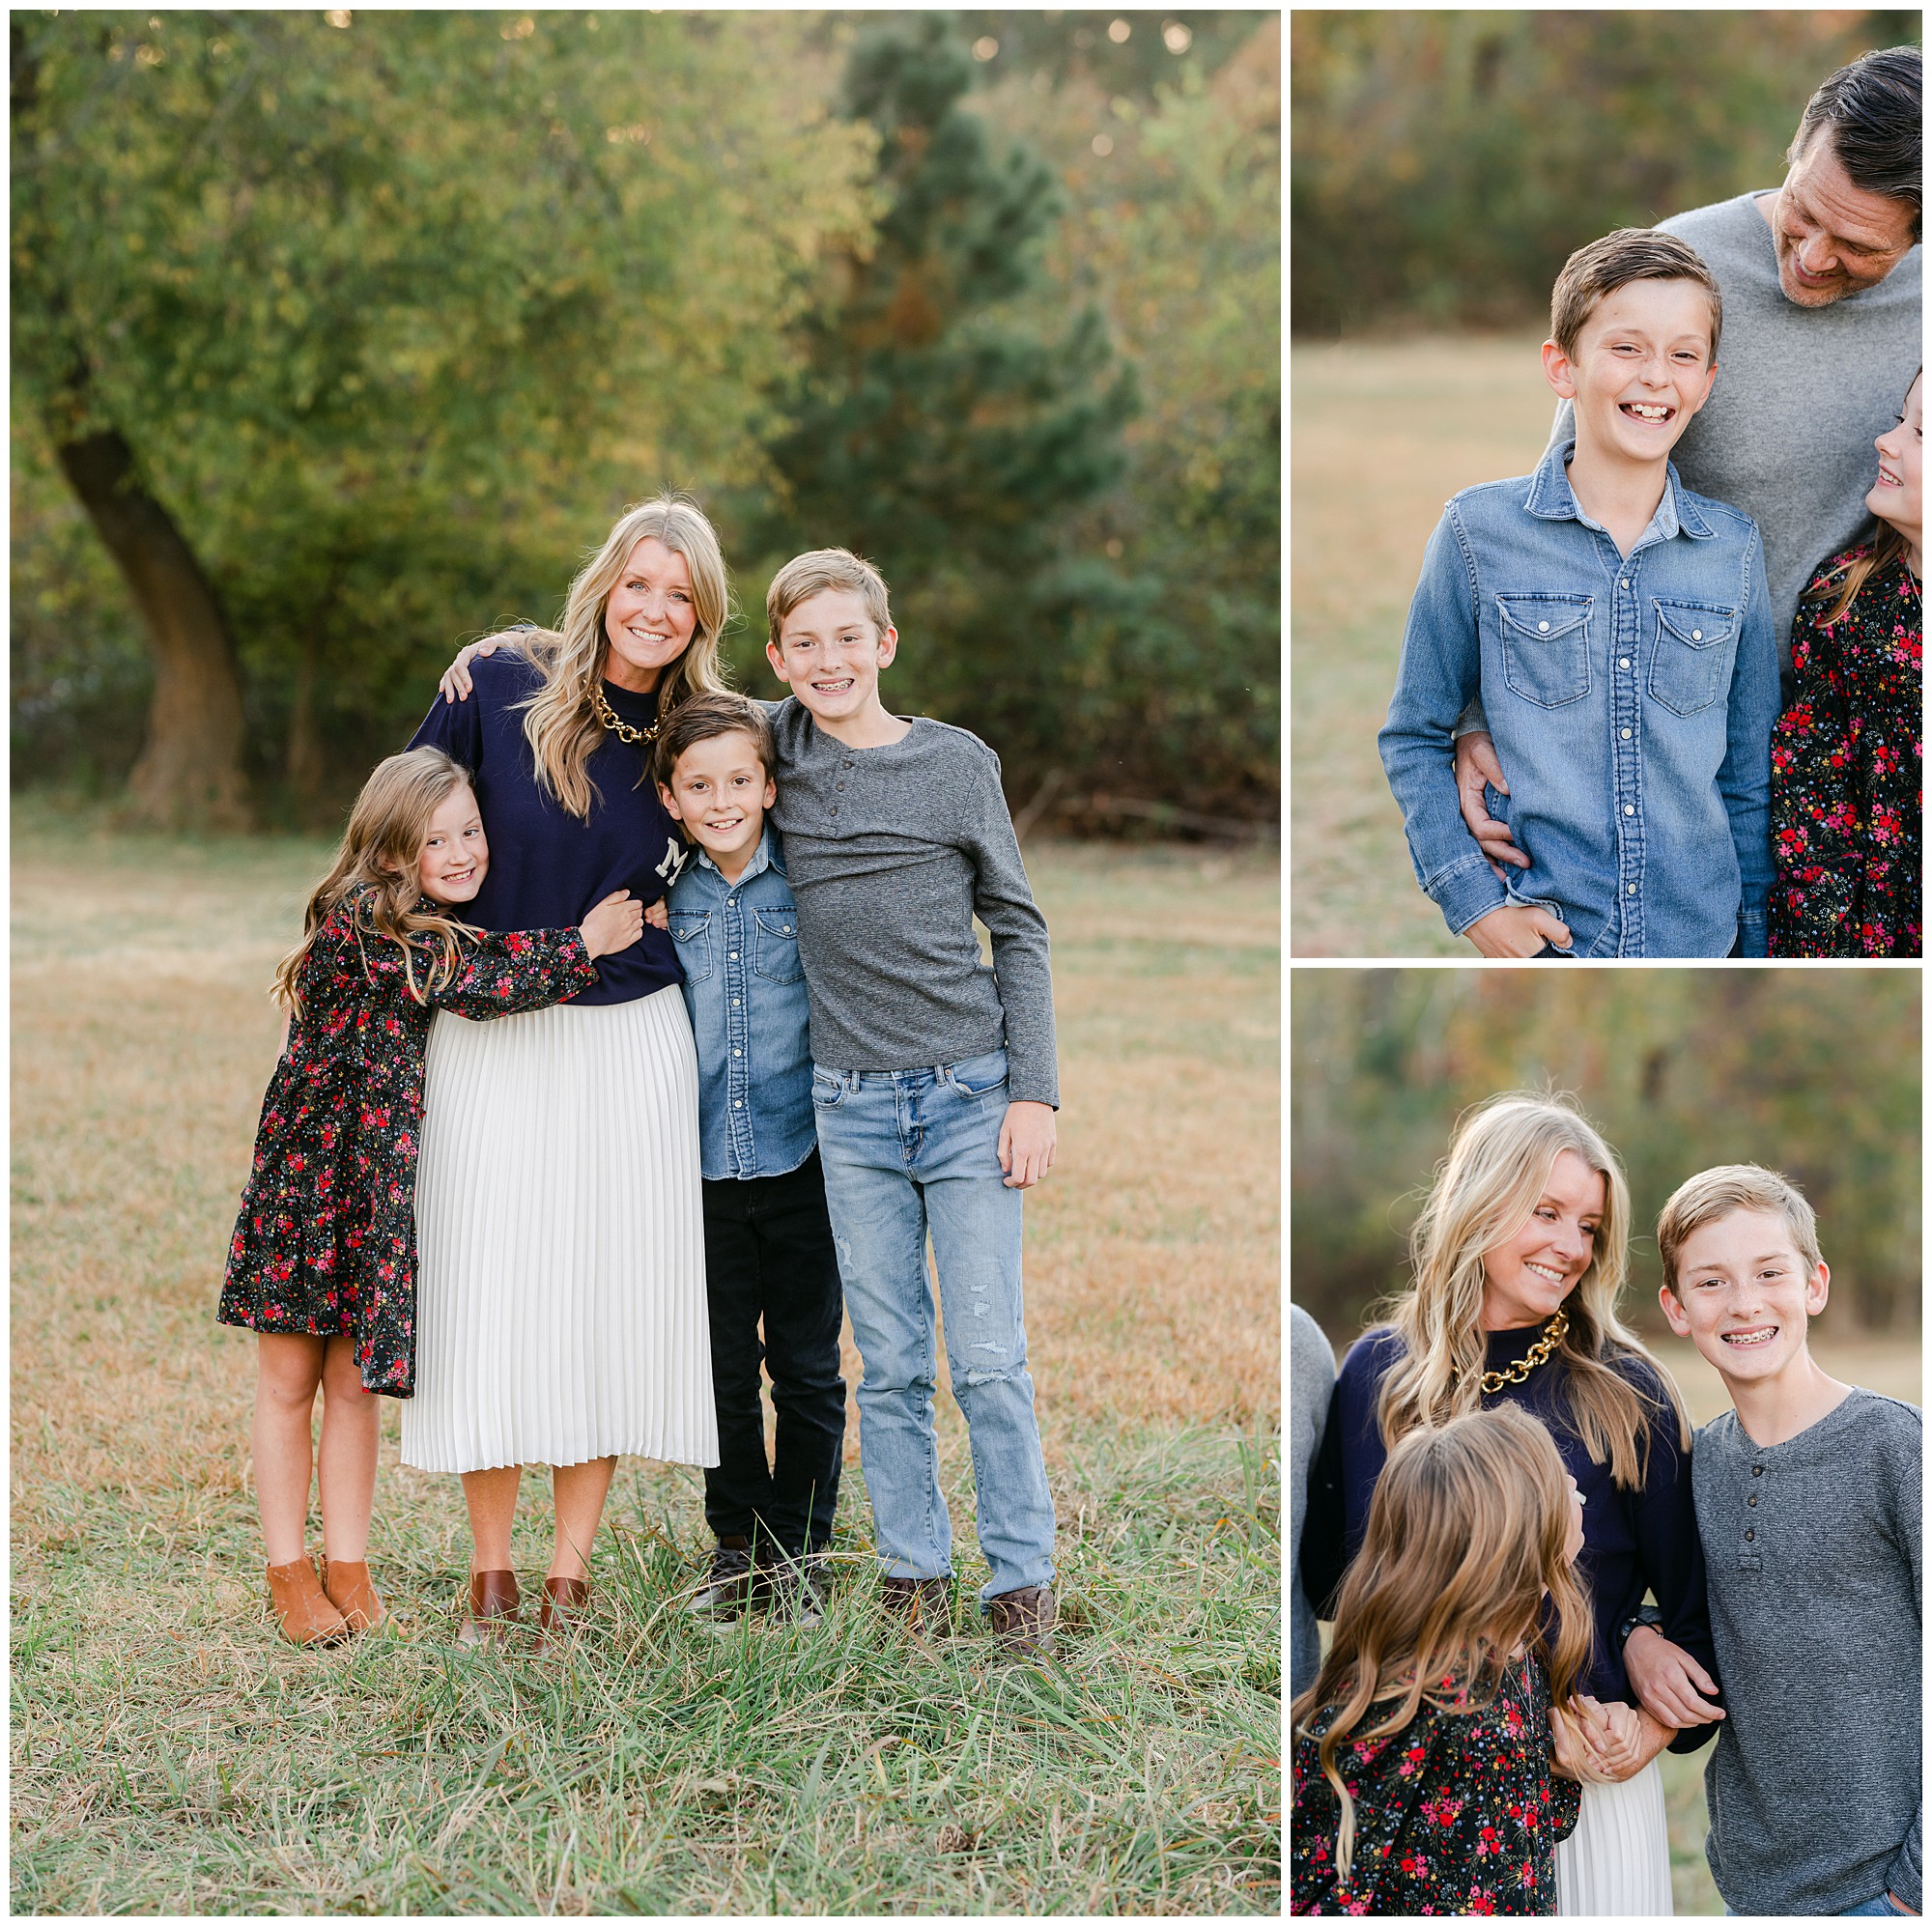 Fall family photos of a family of 5 in a field taken by Marietta family photographer Lindsey Powell.